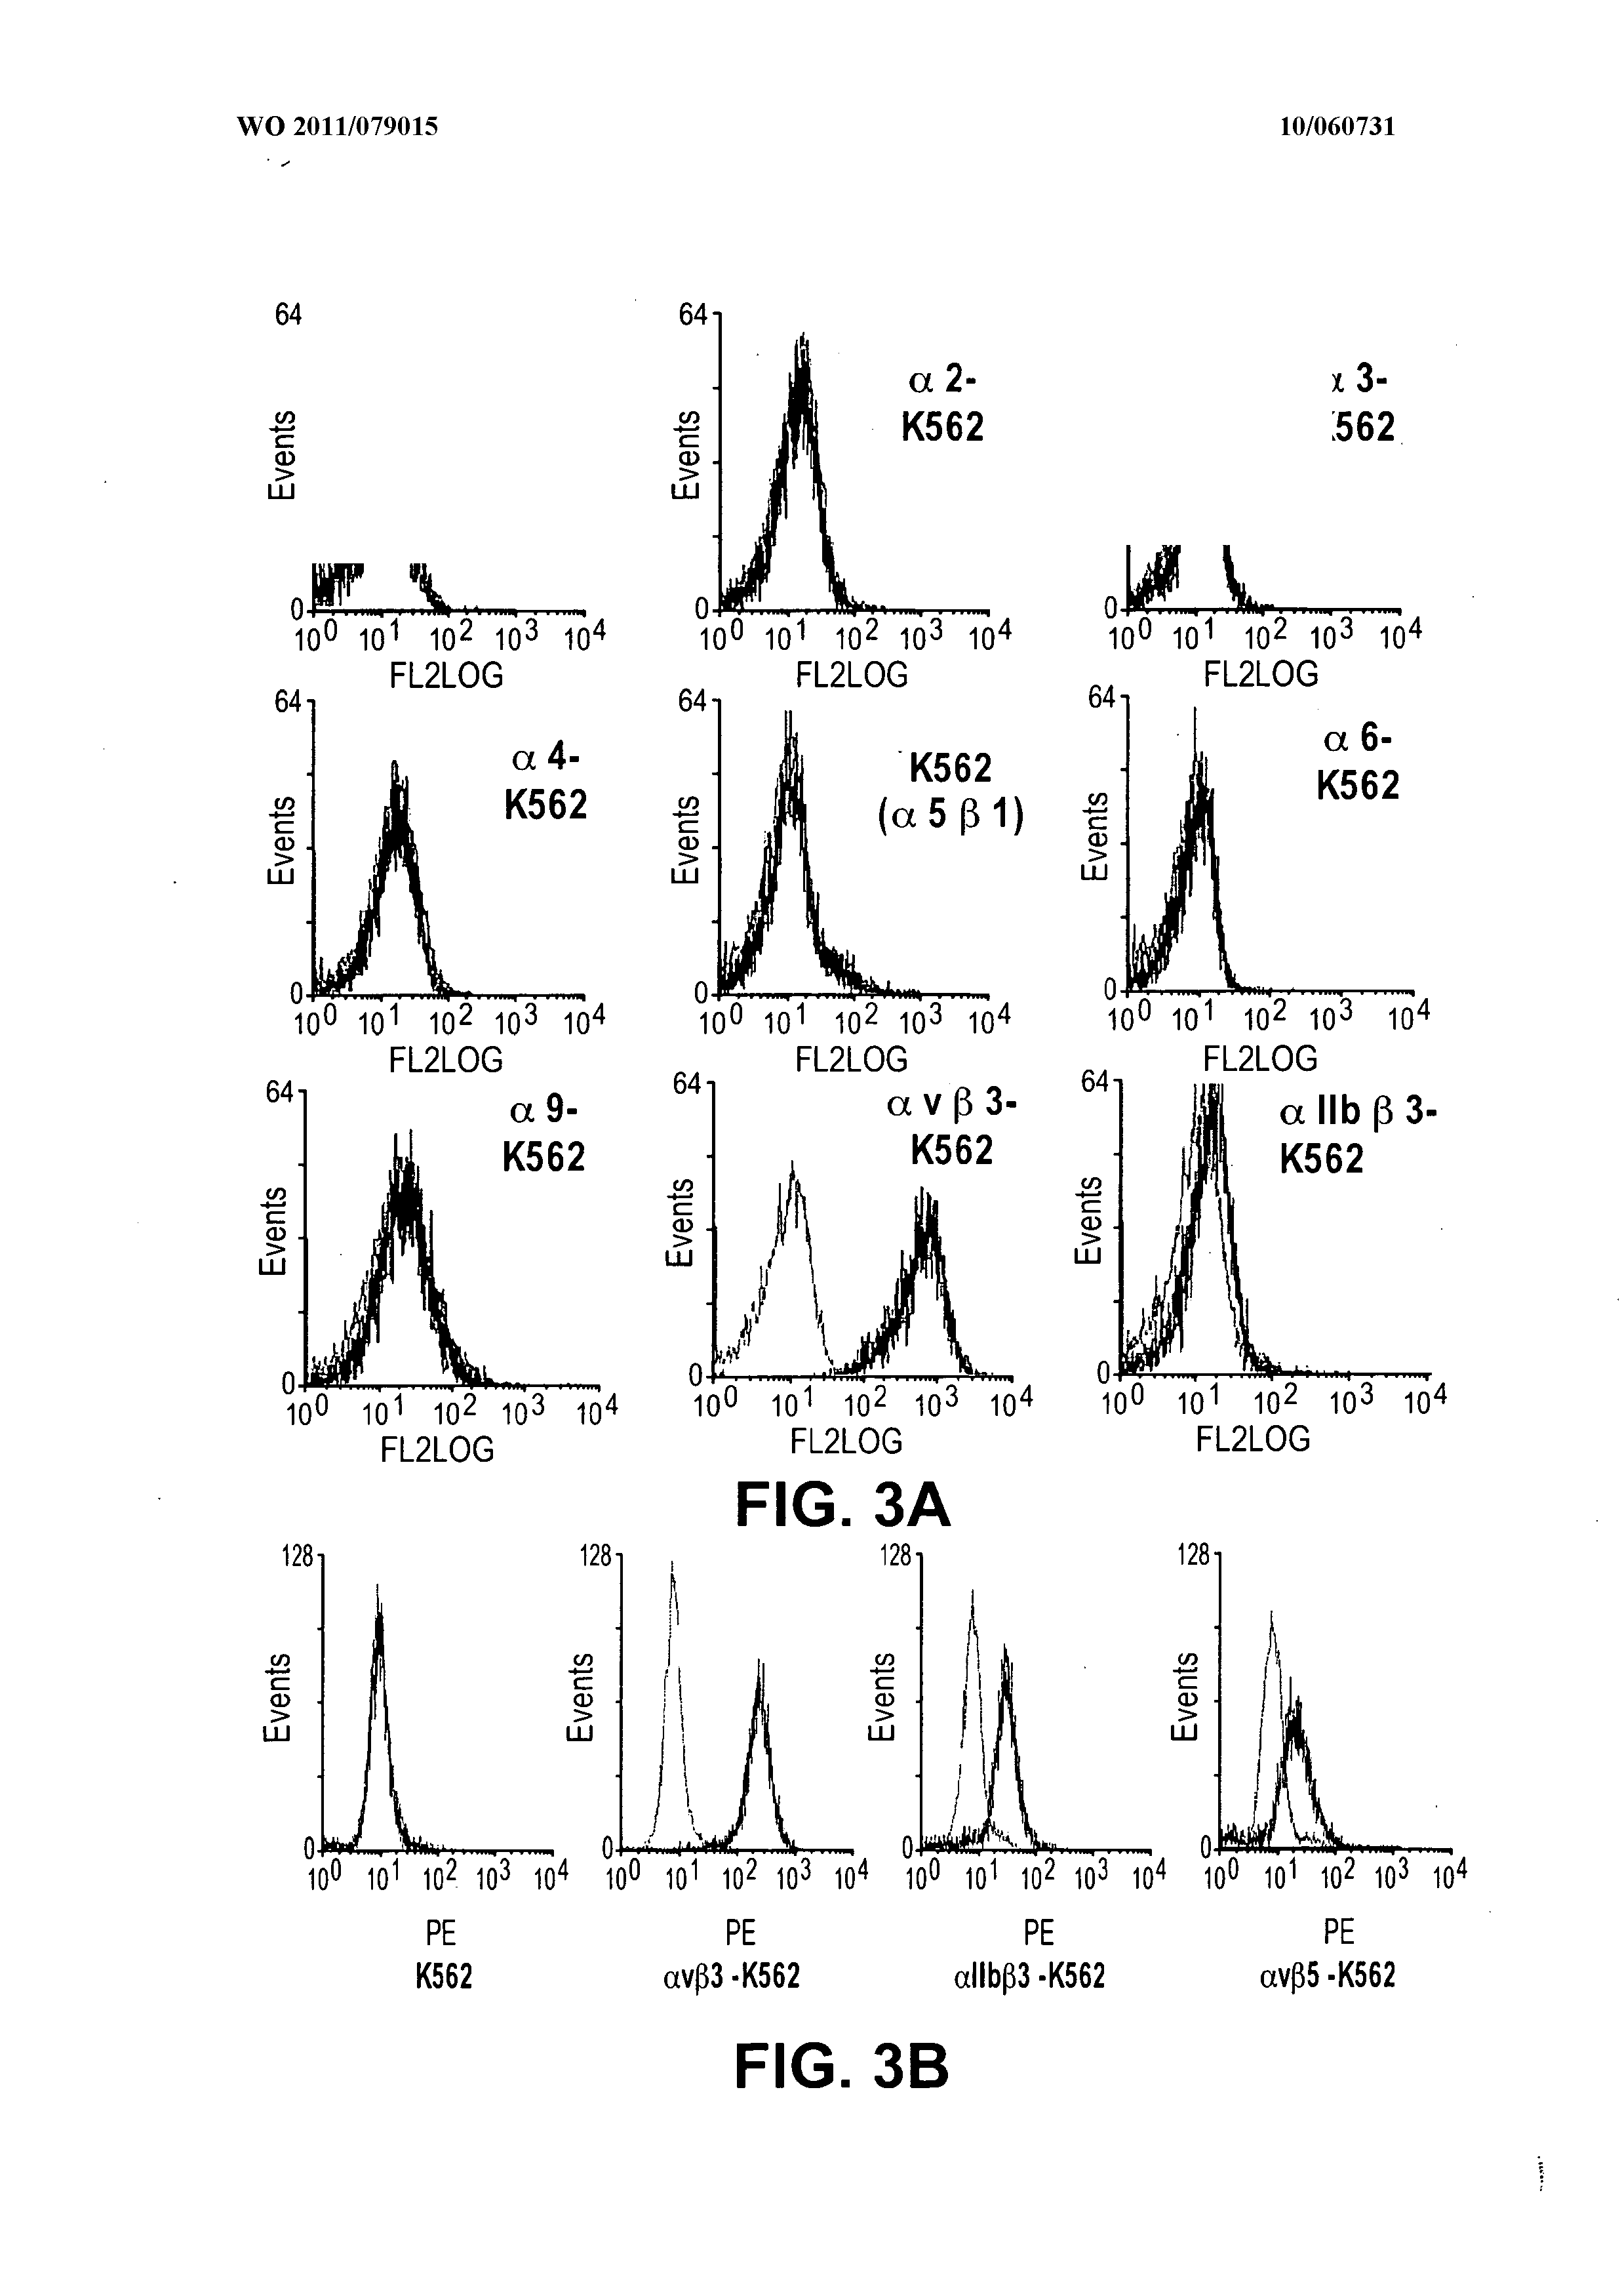 Rgd-containing cyclic peptides